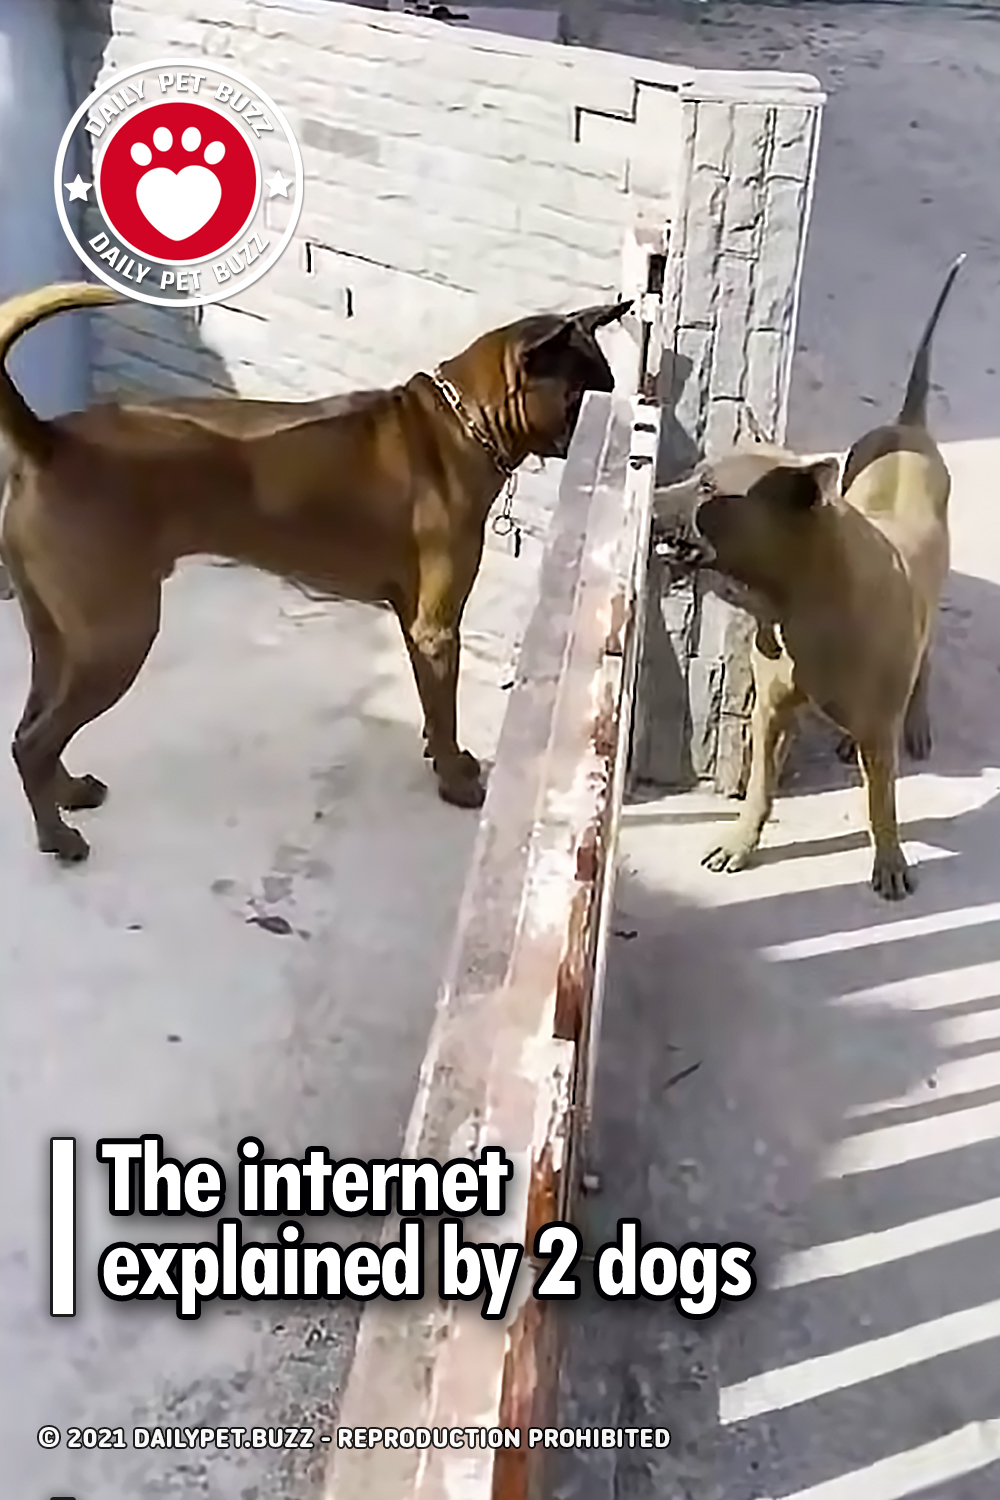 The internet explained by 2 dogs